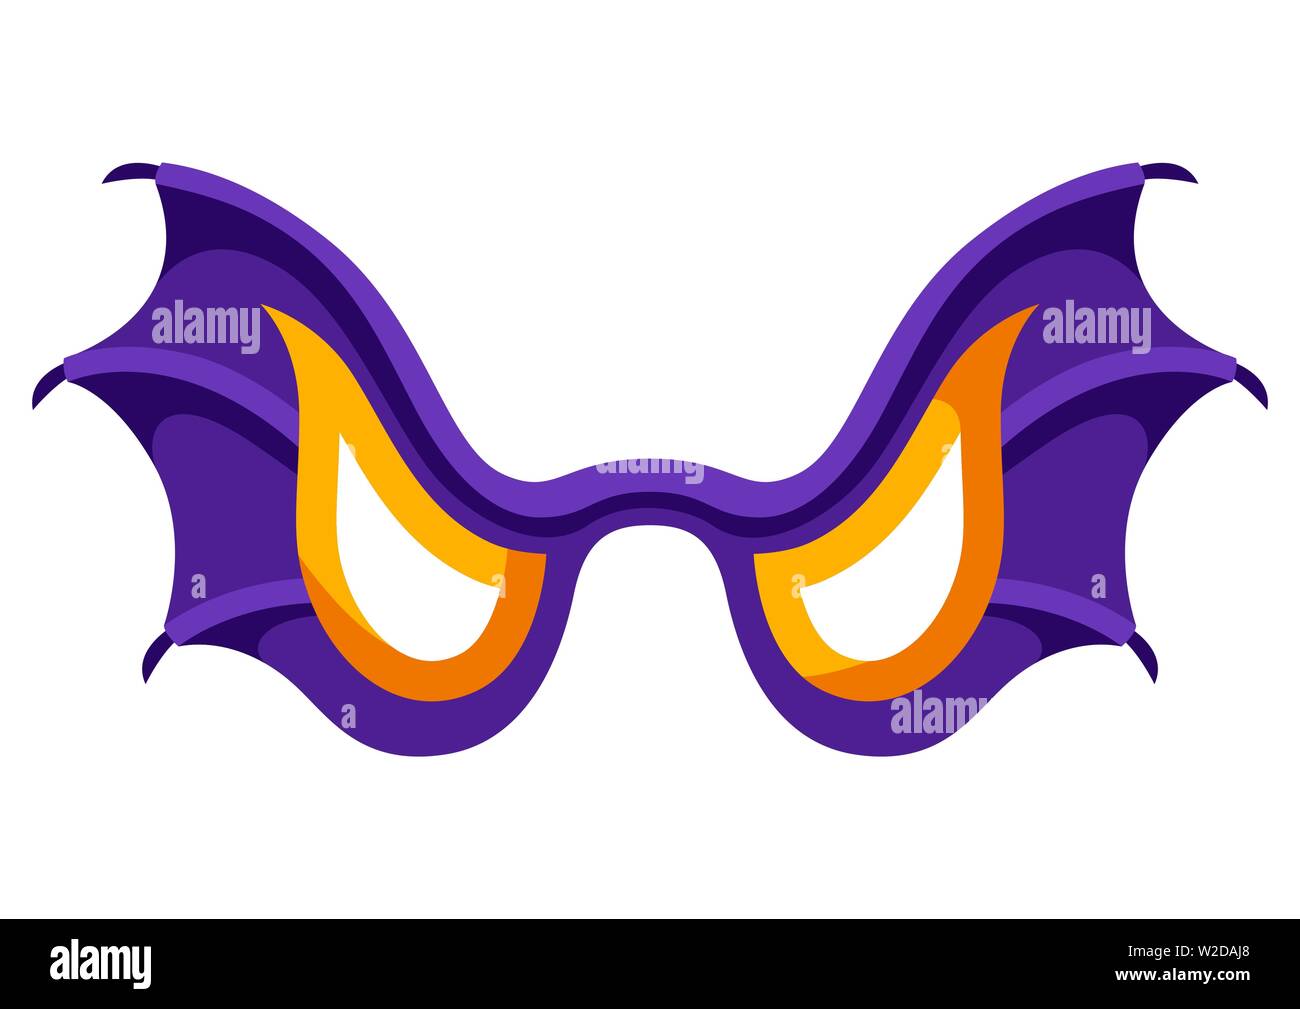 Happy halloween illustration of angry bat wing mask. Stock Vector